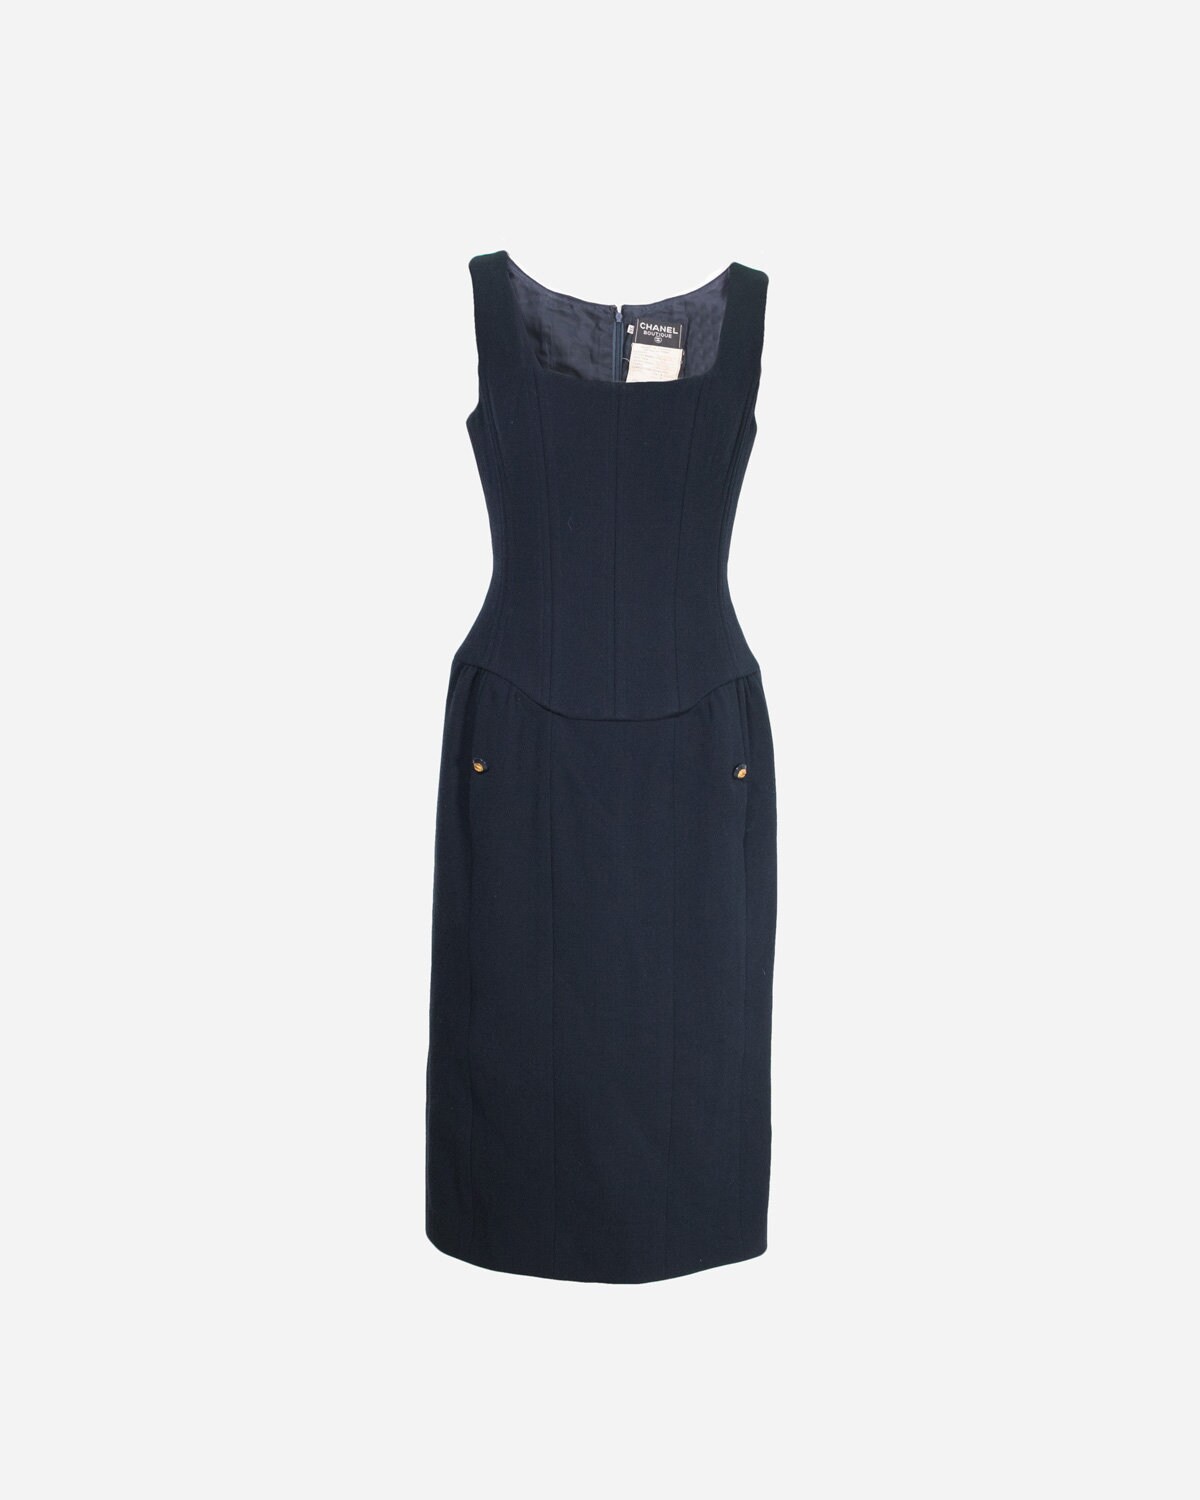 Buy Chanel Bodycon Dress Online In India -  India